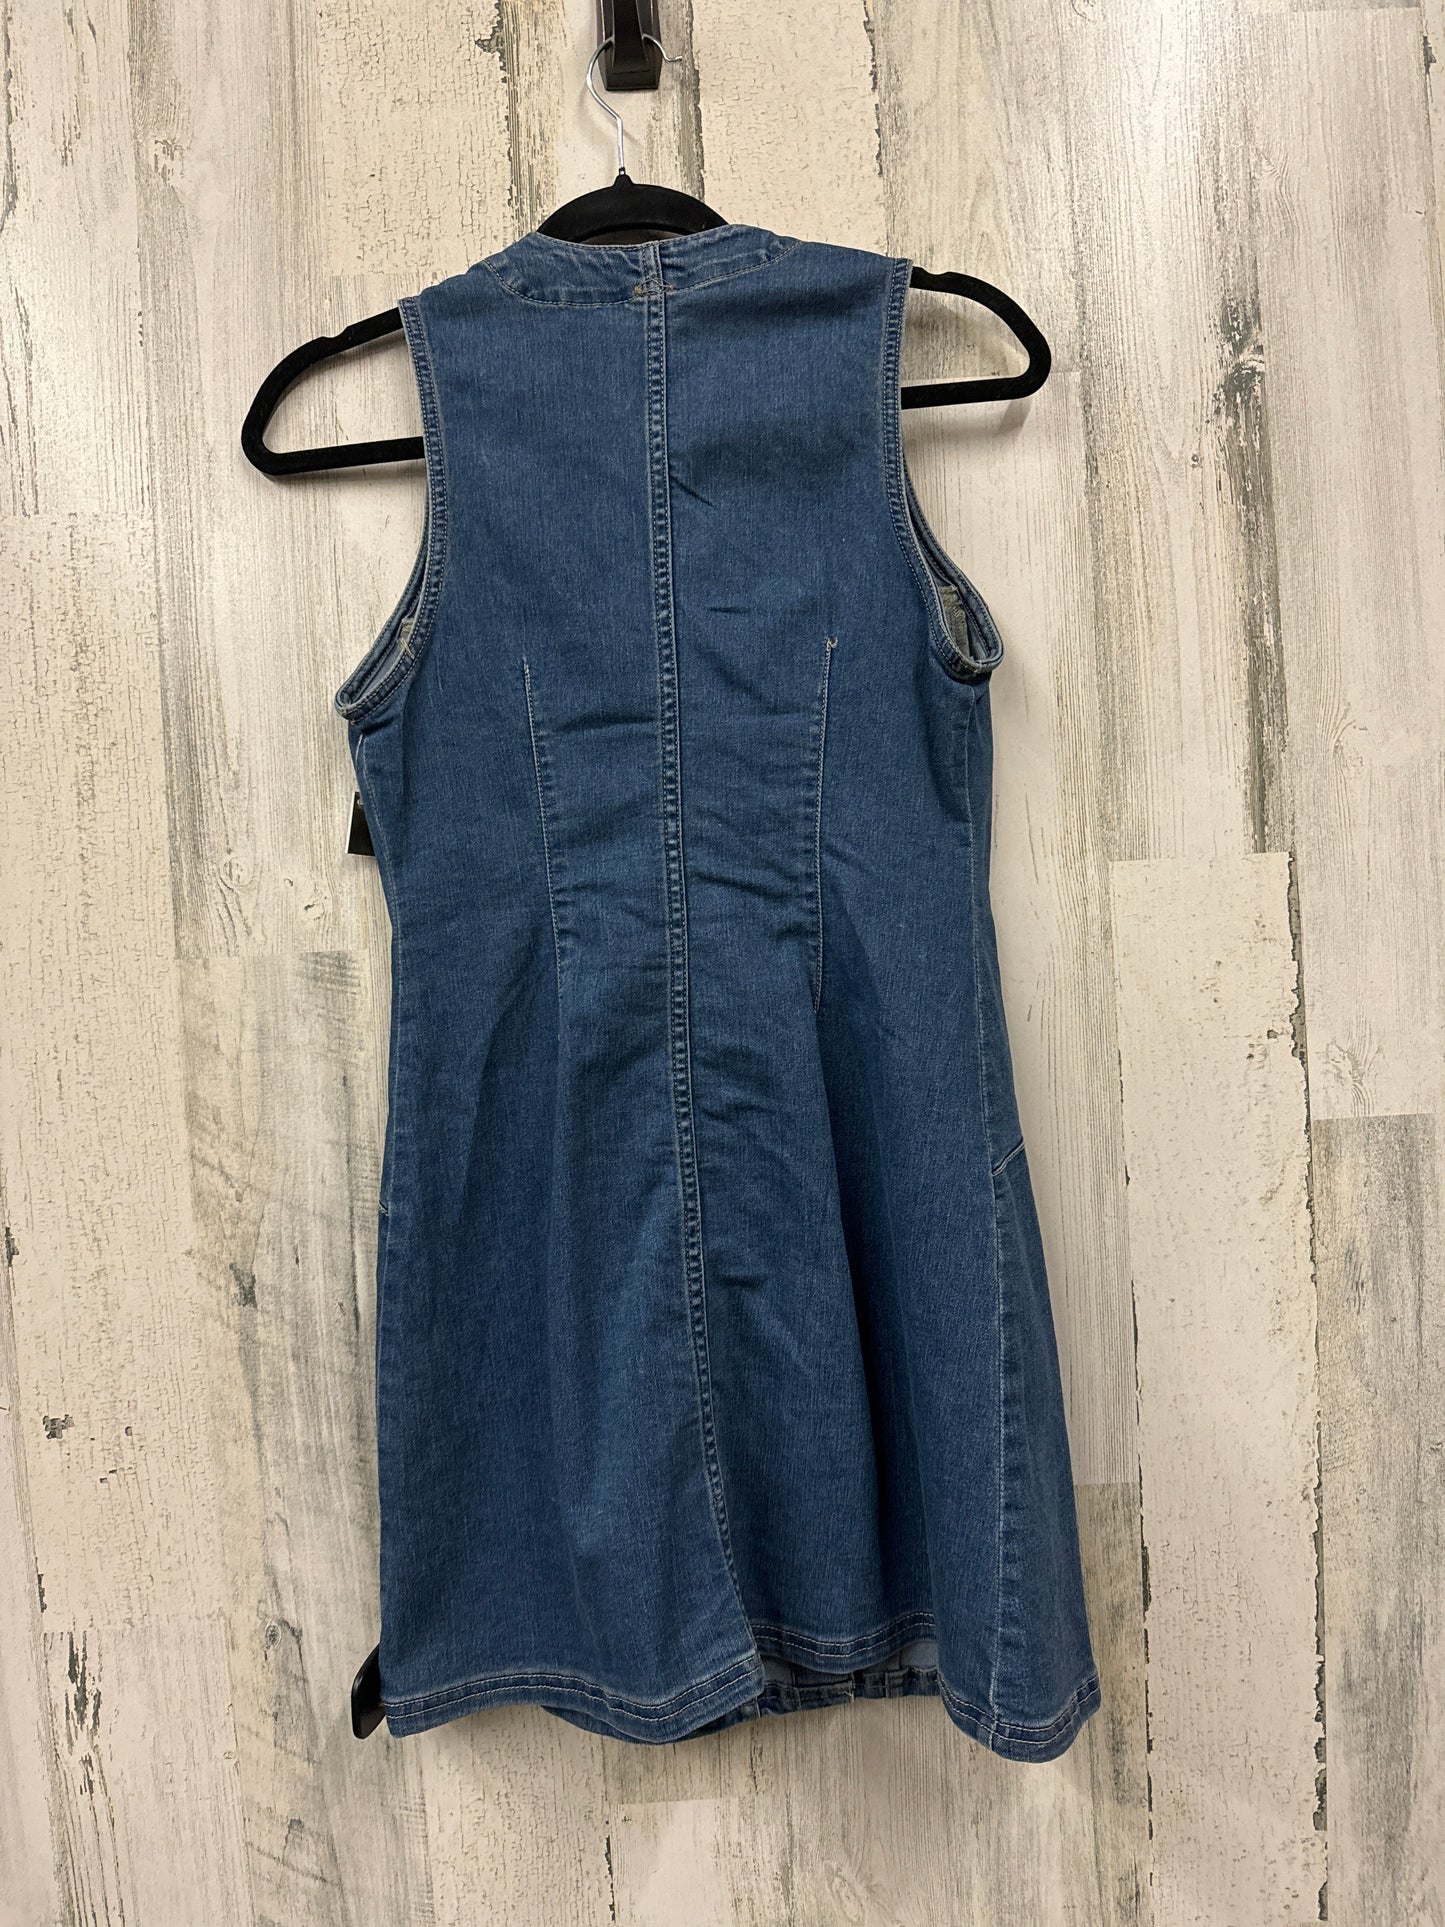 Blue Dress Casual Short Free People, Size Xs